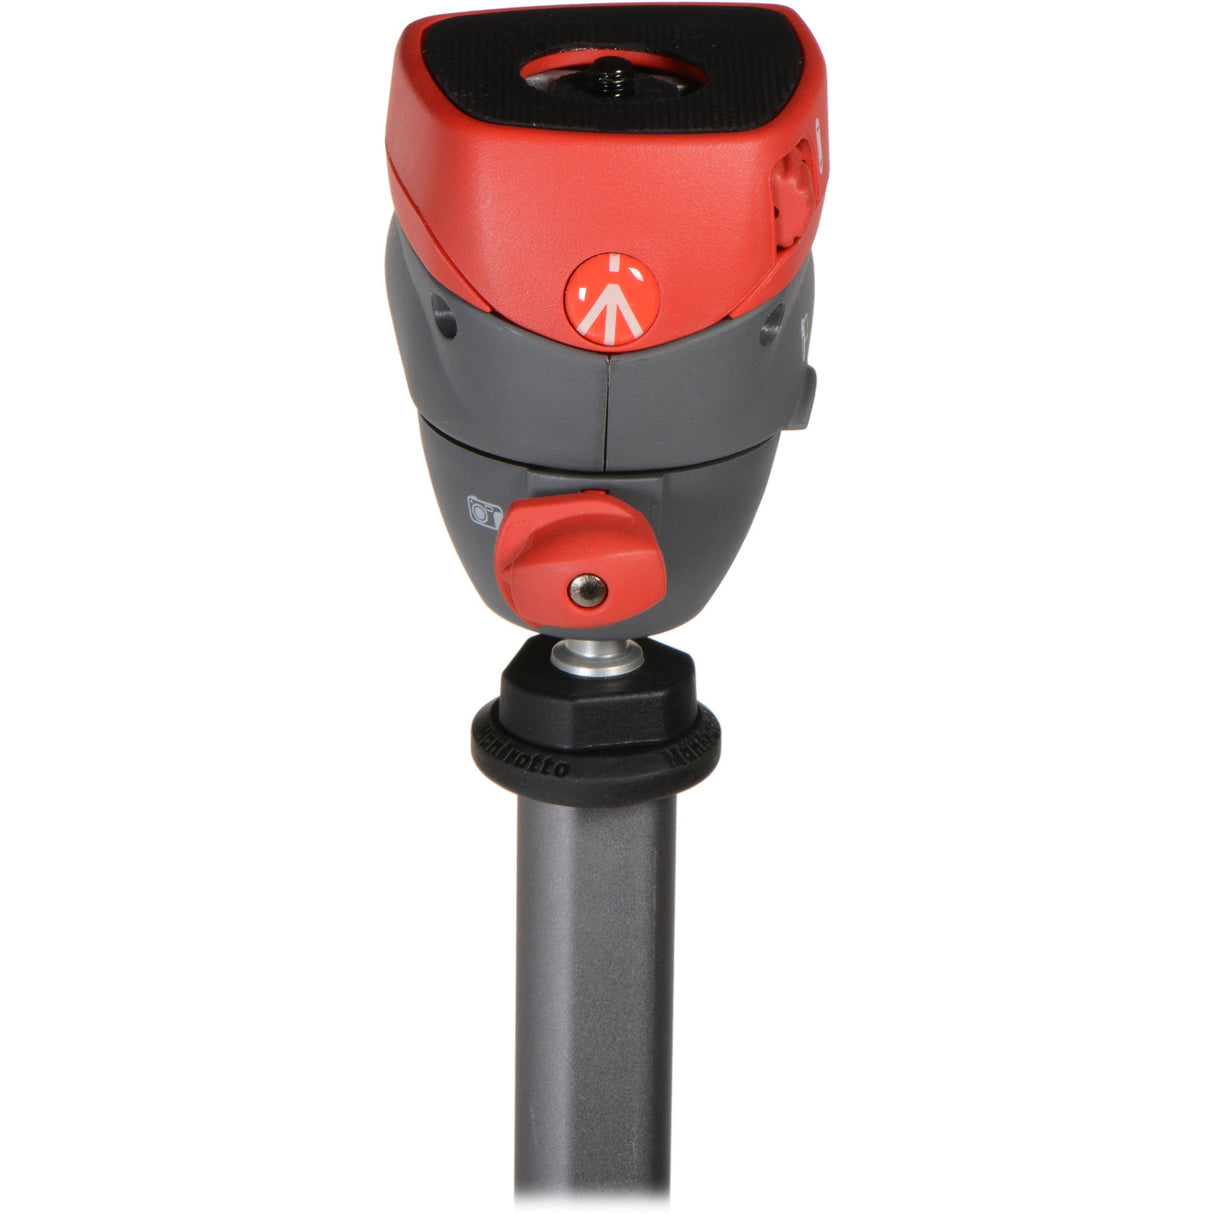 Manfrotto Compact Action Aluminum Tripod (Red)